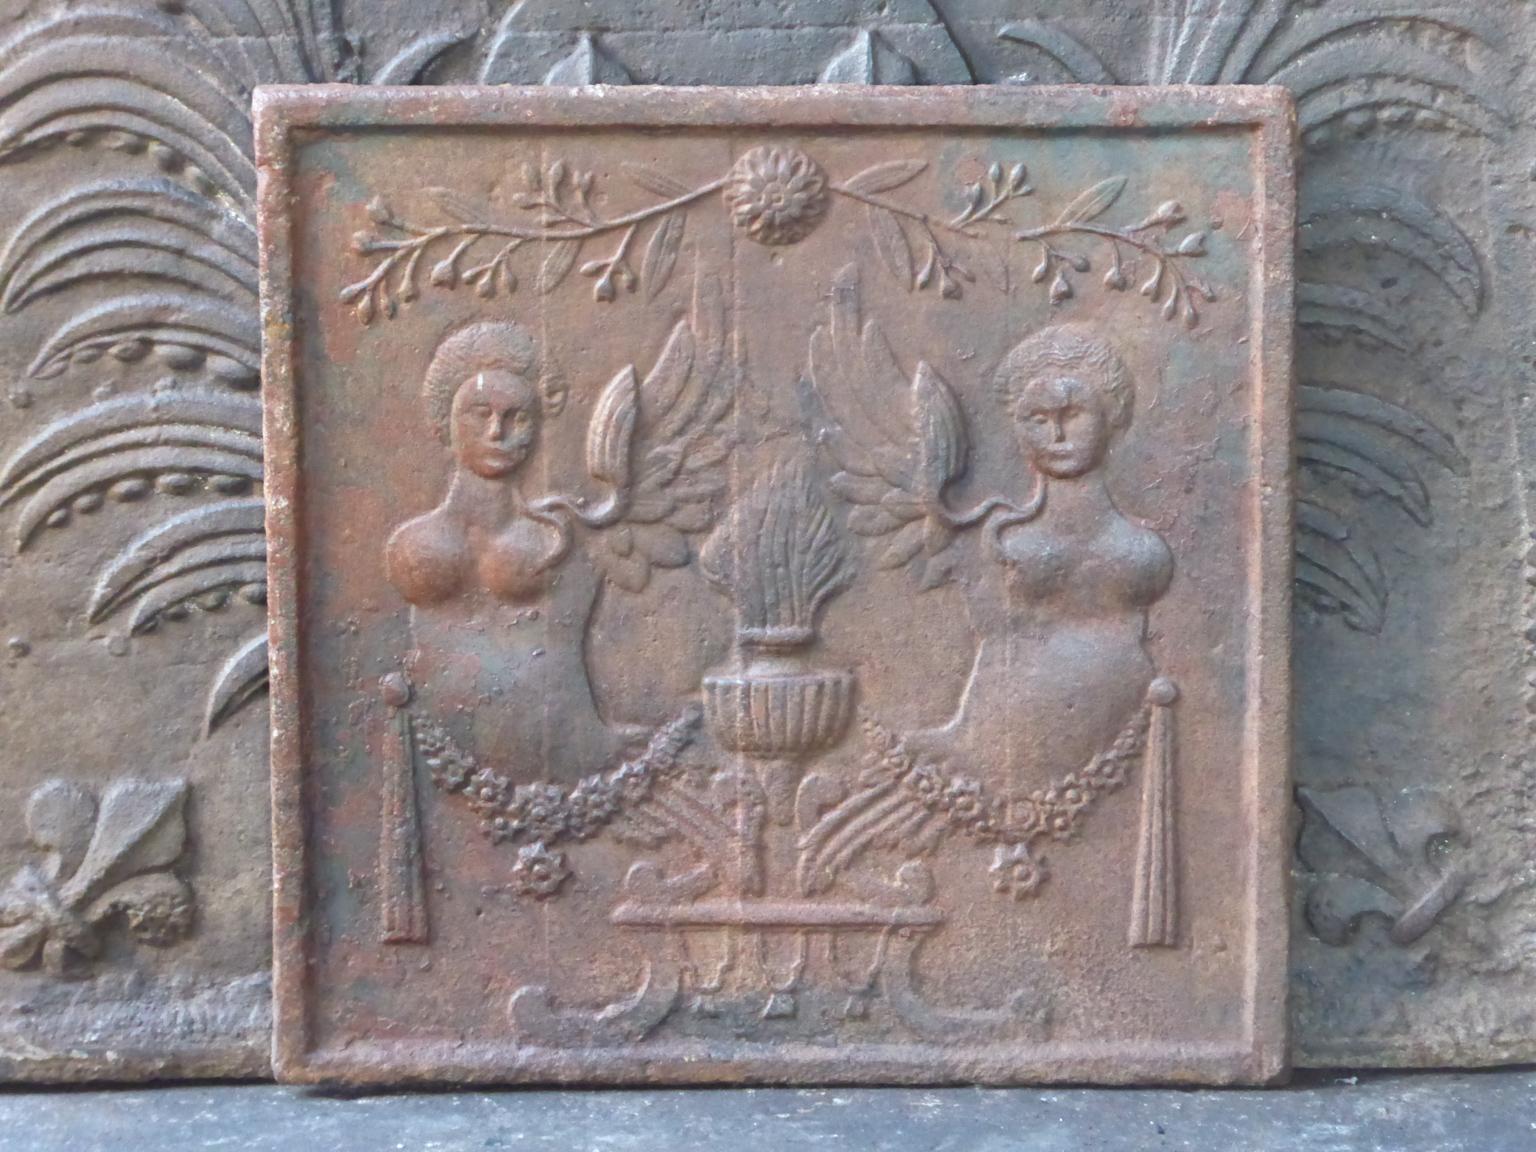 18th-19th century French fireback with an allegory of love. 

The fireback is made of cast iron and has a natural brown patina. Upon request it can be made black / pewter. The fireback is in a good condition and does not have